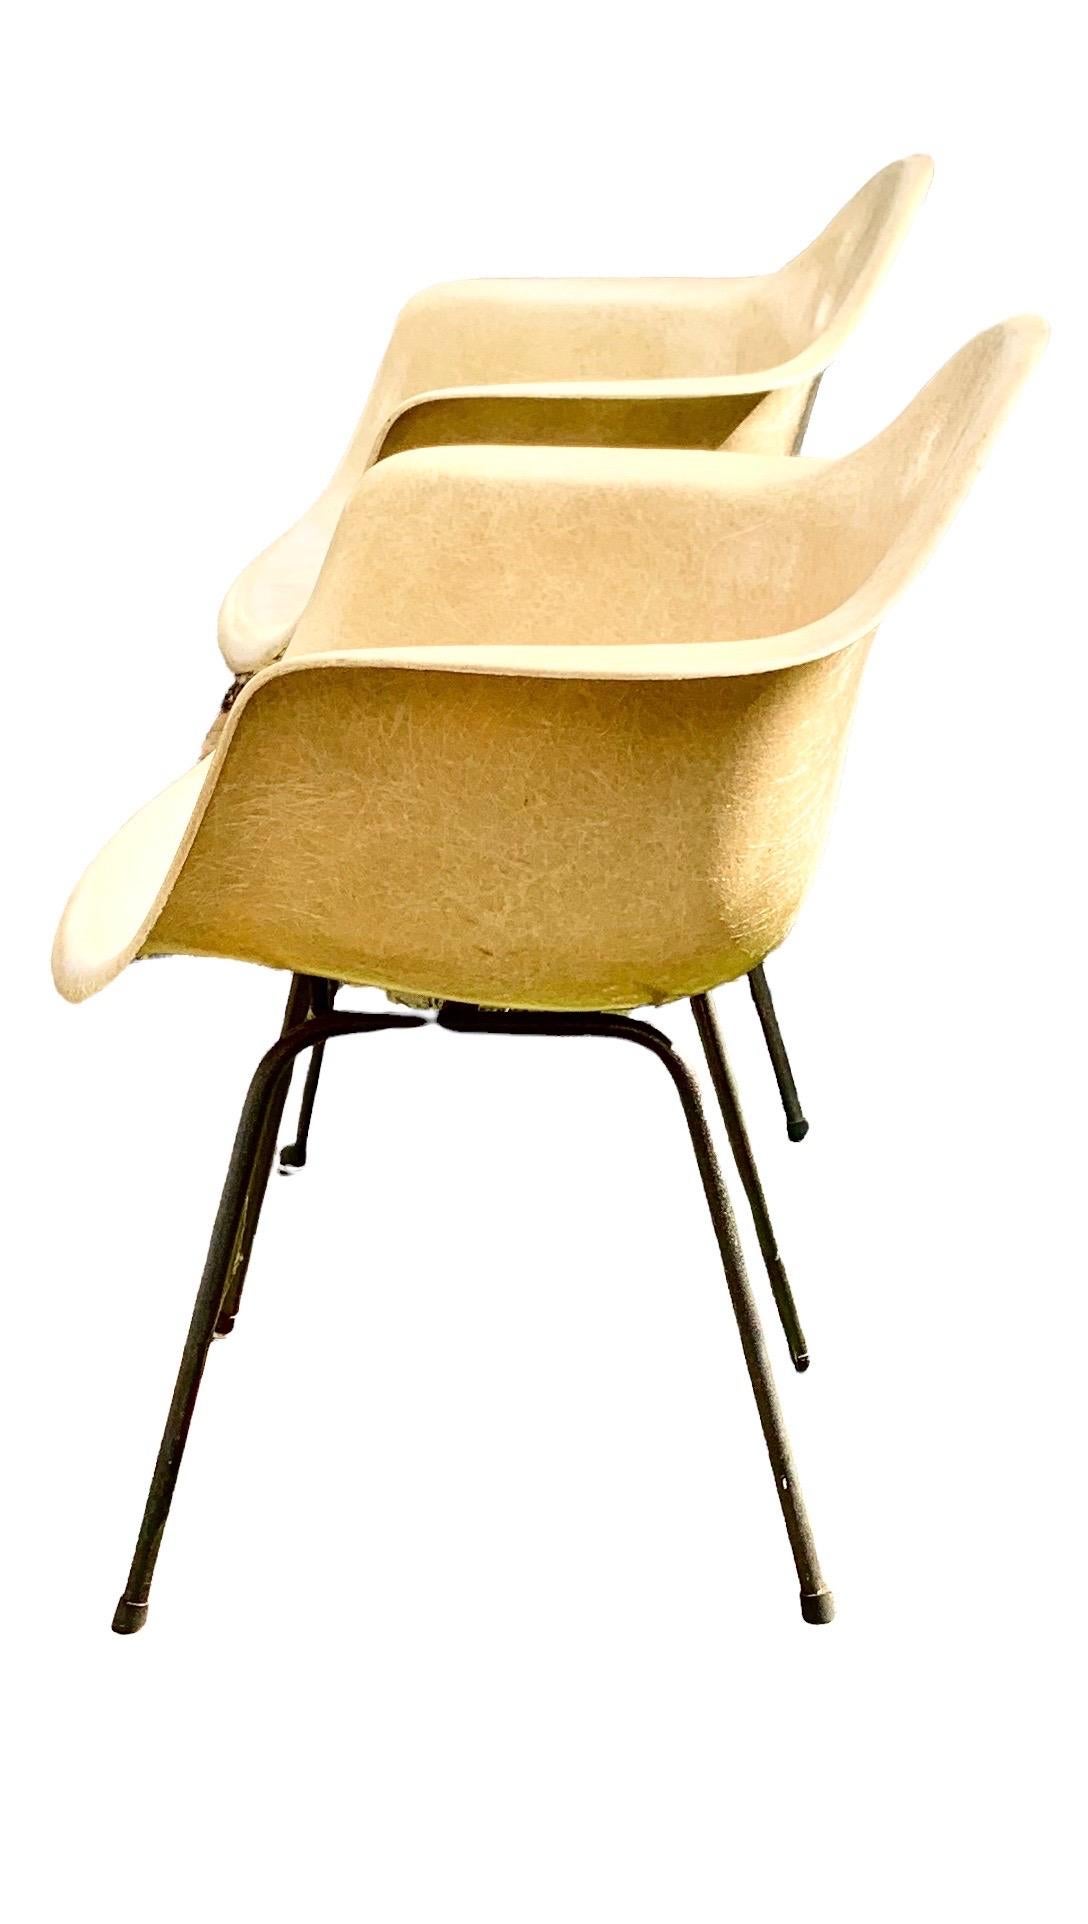 1950's Vintage Charles Eames Fiberglass Shell Armchairs for Herman Miller-A Pair In Good Condition For Sale In New Orleans, LA